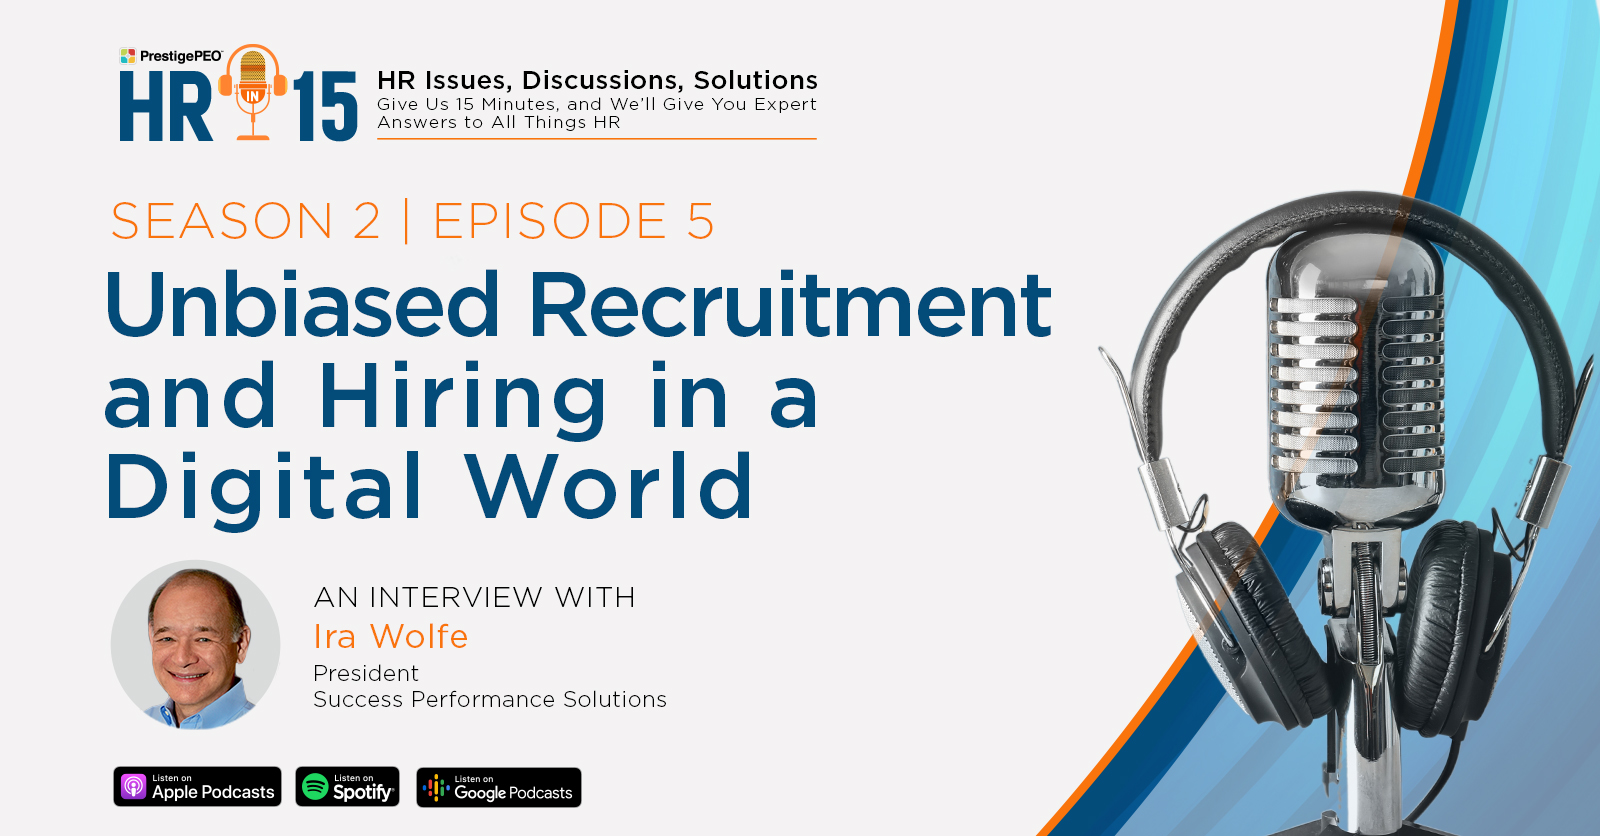 HR-in-15 interview with Ira Wolfe: Unbiased recruitment and hiring in a digital world